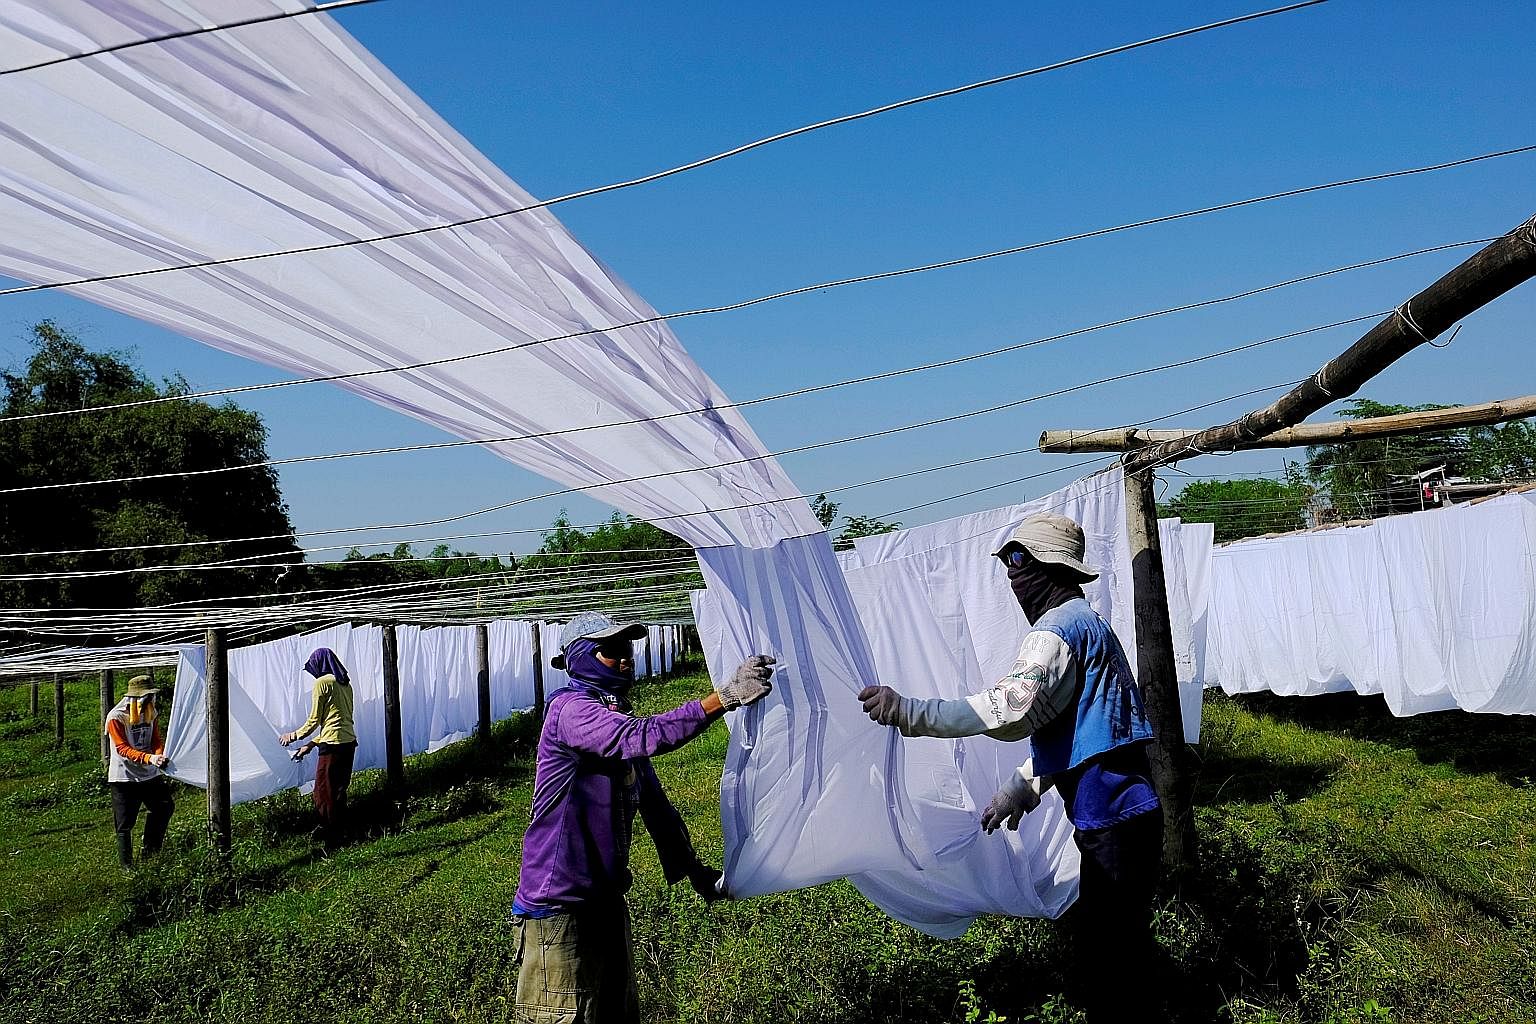 Workers at a textile factory in Solo, Central Java. Indonesia's labour-intensive industries such as textile and garment-making have been experiencing negative growth since the last quarter of 2014, while ceding ground to a more competitive Vietnam, w